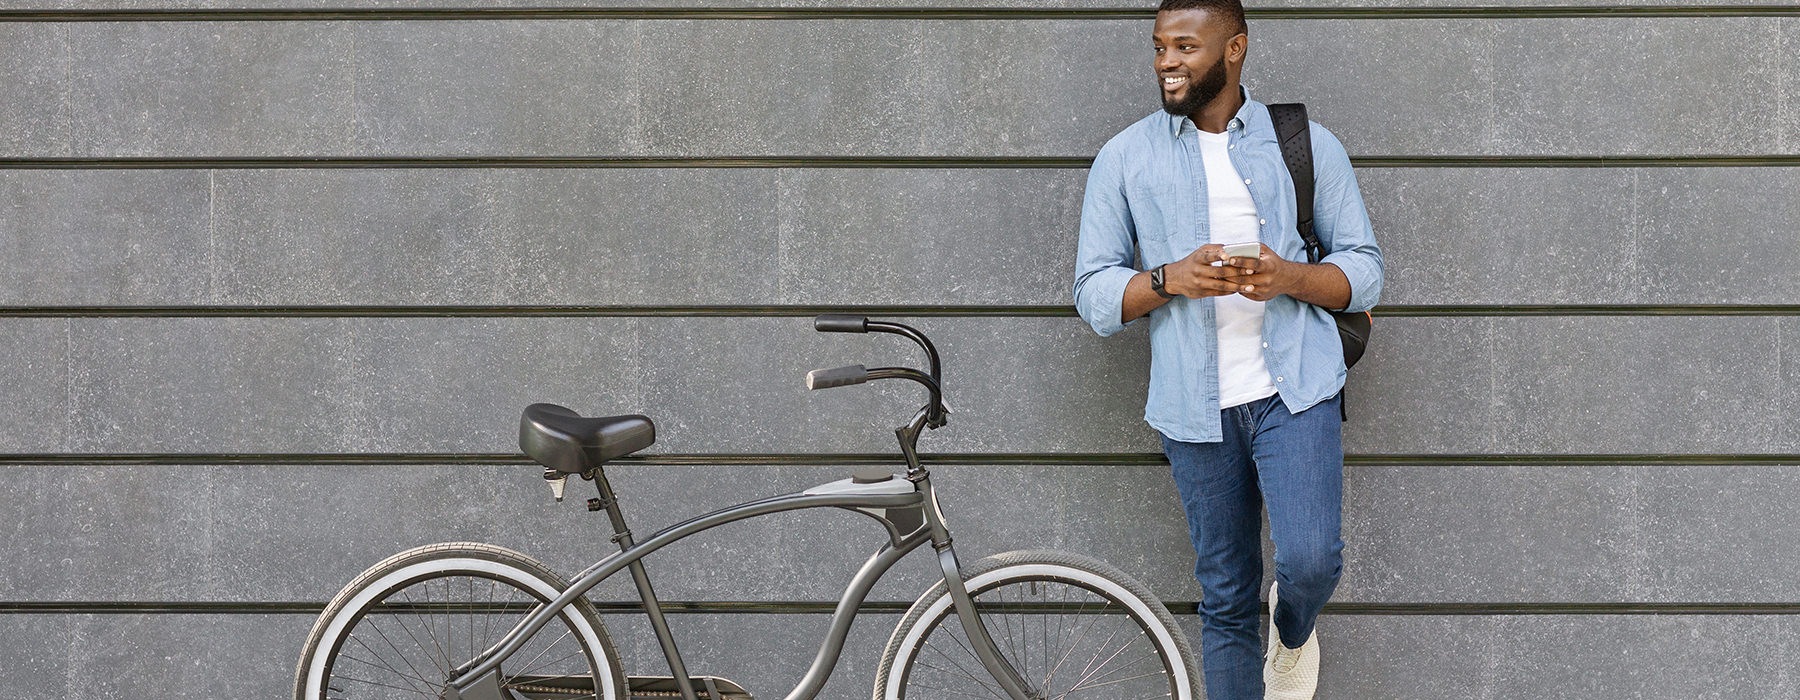 A man is leaning against the wall with his bike next to him 